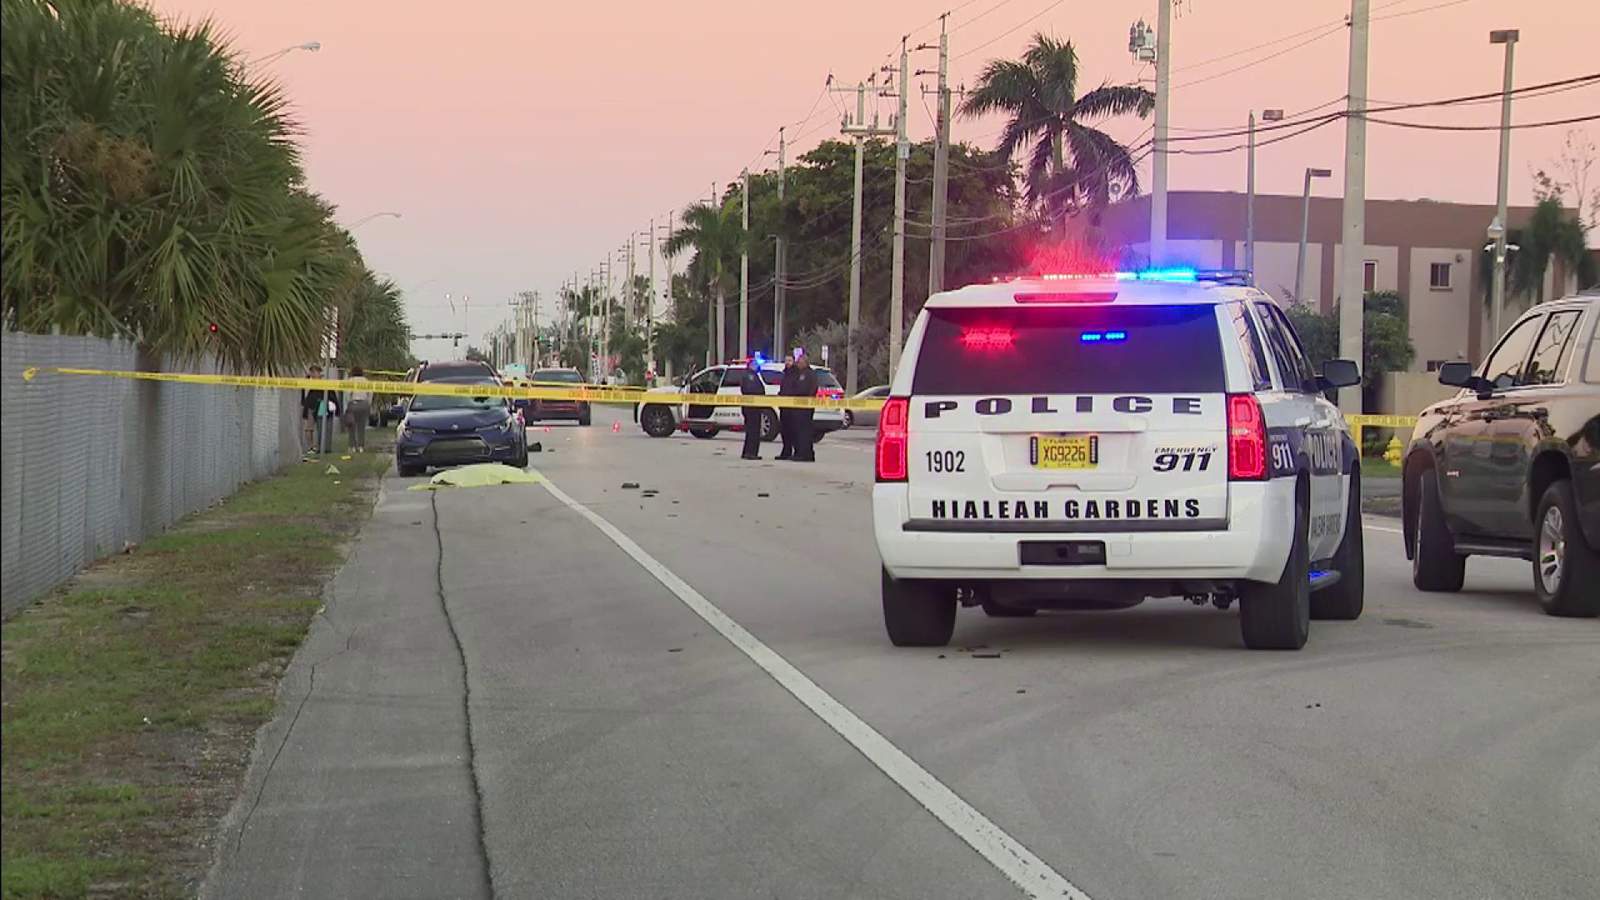 Family members witness man get fatally struck by two vehicles in Hialeah Gardens